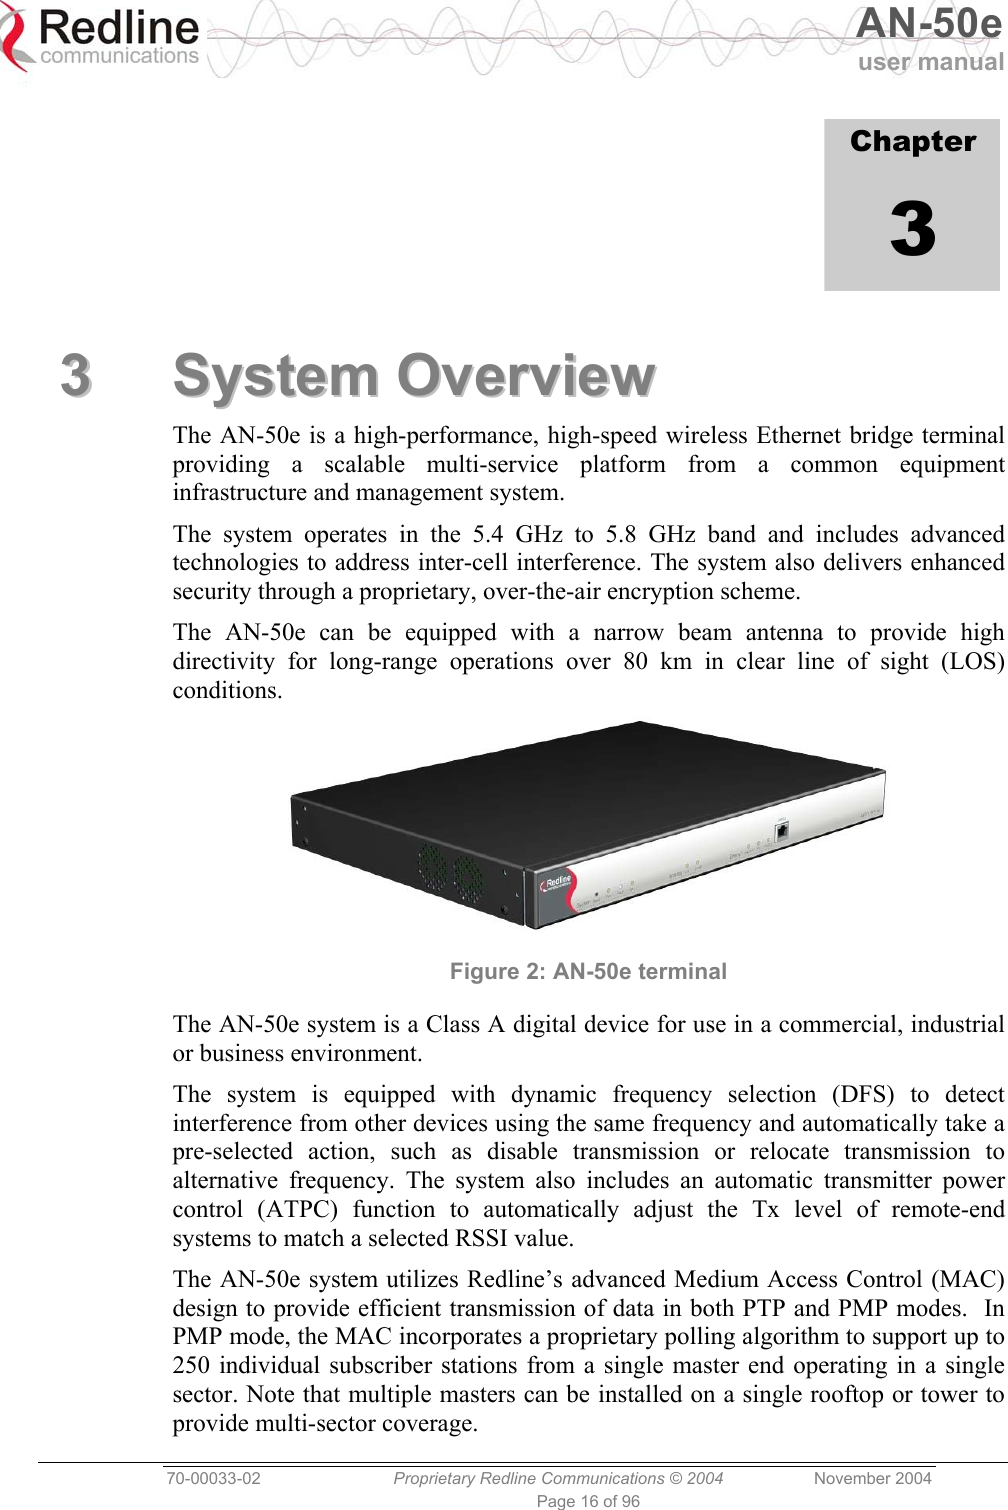   AN-50e user manual  70-00033-02  Proprietary Redline Communications © 2004 November 2004 Page 16 of 96             Chapter 3 33  SSyysstteemm  OOvveerrvviieeww  The AN-50e is a high-performance, high-speed wireless Ethernet bridge terminal providing a scalable multi-service platform from a common equipment infrastructure and management system. The system operates in the 5.4 GHz to 5.8 GHz band and includes advanced technologies to address inter-cell interference. The system also delivers enhanced security through a proprietary, over-the-air encryption scheme. The AN-50e can be equipped with a narrow beam antenna to provide high directivity for long-range operations over 80 km in clear line of sight (LOS) conditions.  Figure 2: AN-50e terminal The AN-50e system is a Class A digital device for use in a commercial, industrial or business environment. The system is equipped with dynamic frequency selection (DFS) to detect interference from other devices using the same frequency and automatically take a pre-selected action, such as disable transmission or relocate transmission to alternative frequency. The system also includes an automatic transmitter power control (ATPC) function to automatically adjust the Tx level of remote-end systems to match a selected RSSI value. The AN-50e system utilizes Redline’s advanced Medium Access Control (MAC) design to provide efficient transmission of data in both PTP and PMP modes.  In PMP mode, the MAC incorporates a proprietary polling algorithm to support up to 250 individual subscriber stations from a single master end operating in a single sector. Note that multiple masters can be installed on a single rooftop or tower to provide multi-sector coverage.   